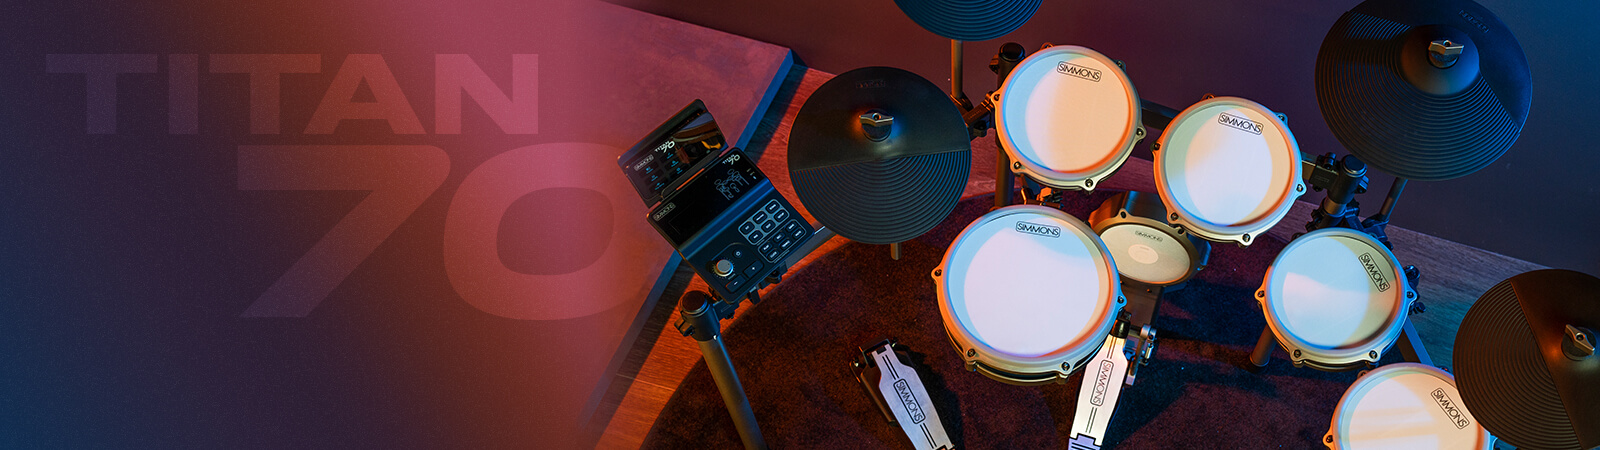 overhead image with logo of the simmons titan 70 electronic drum kit